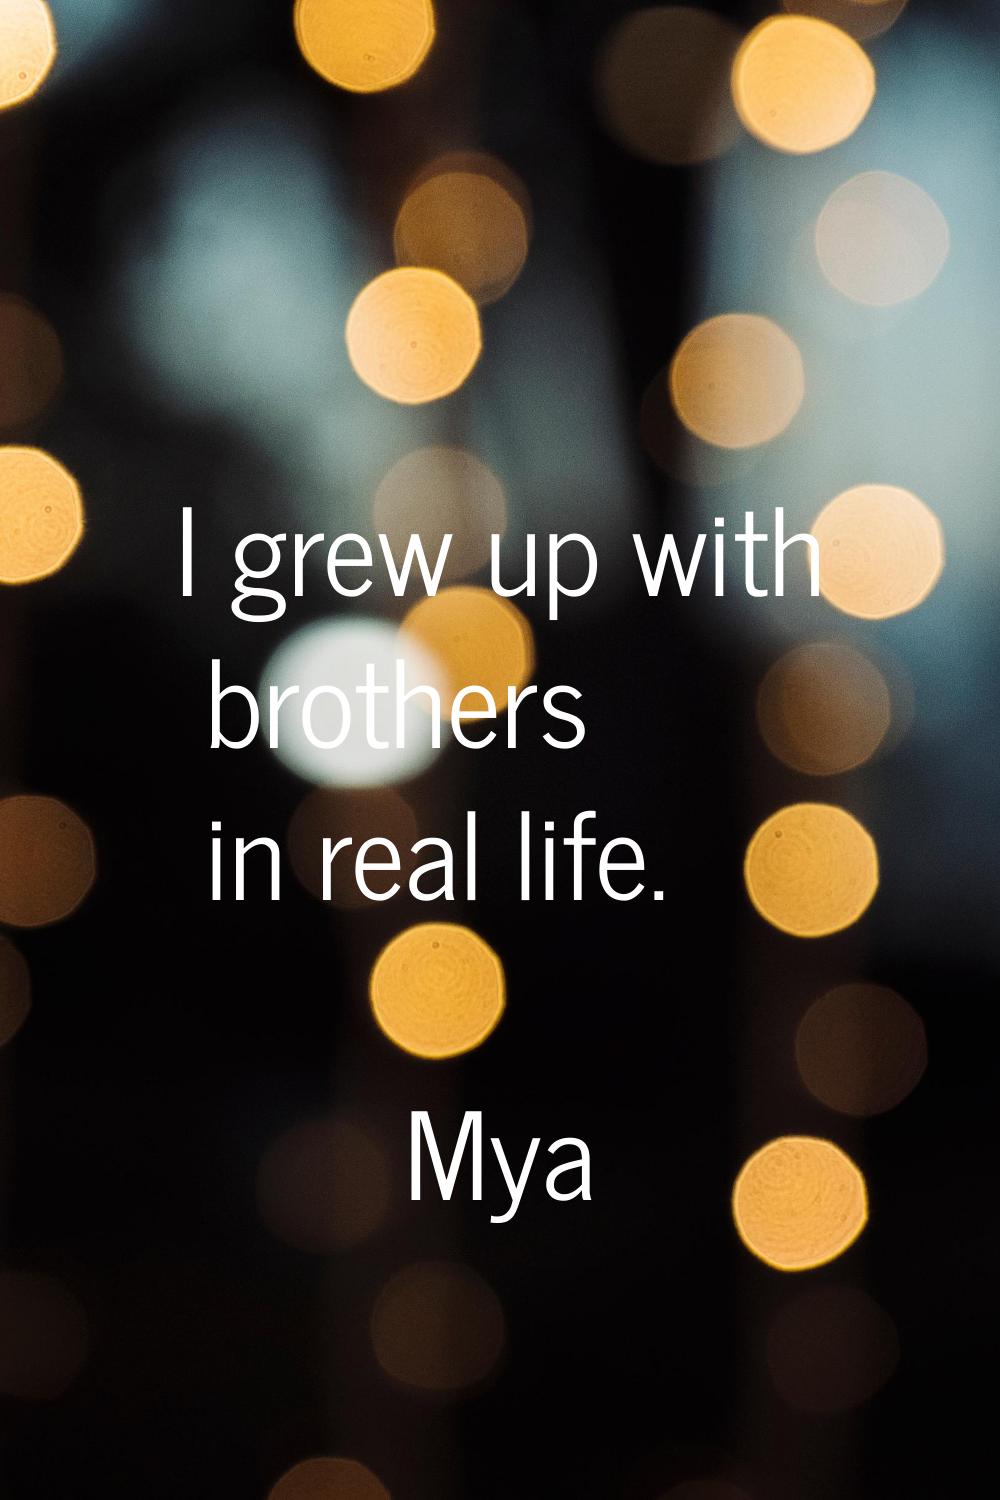 I grew up with brothers in real life.